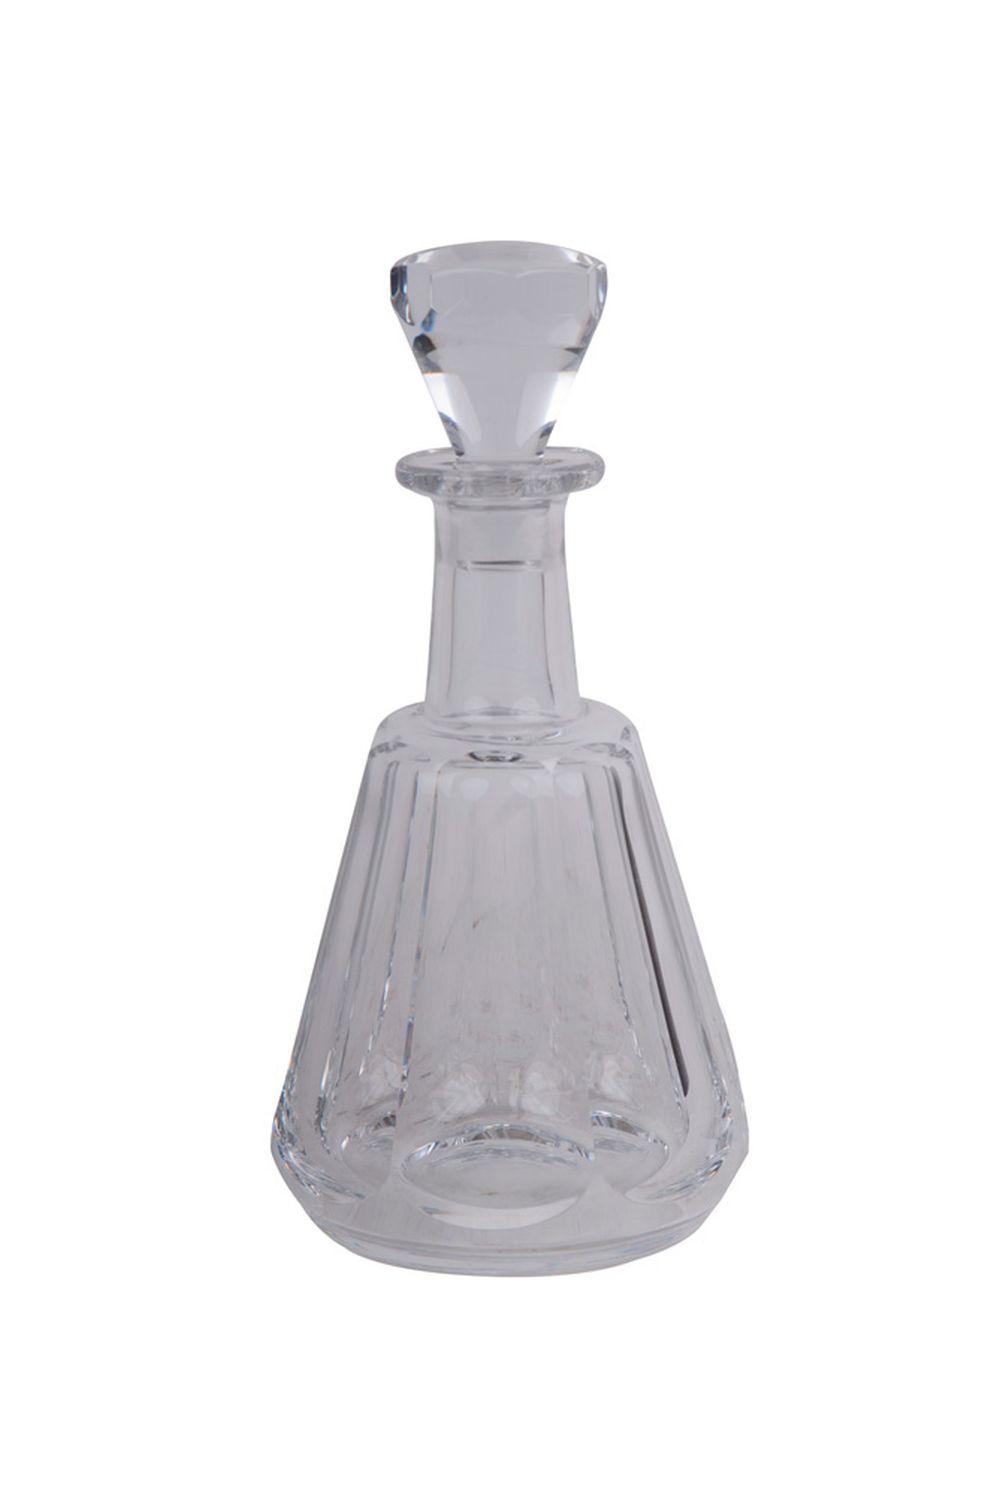 BACCARAT MOLDED GLASS DECANTER10 335b9c